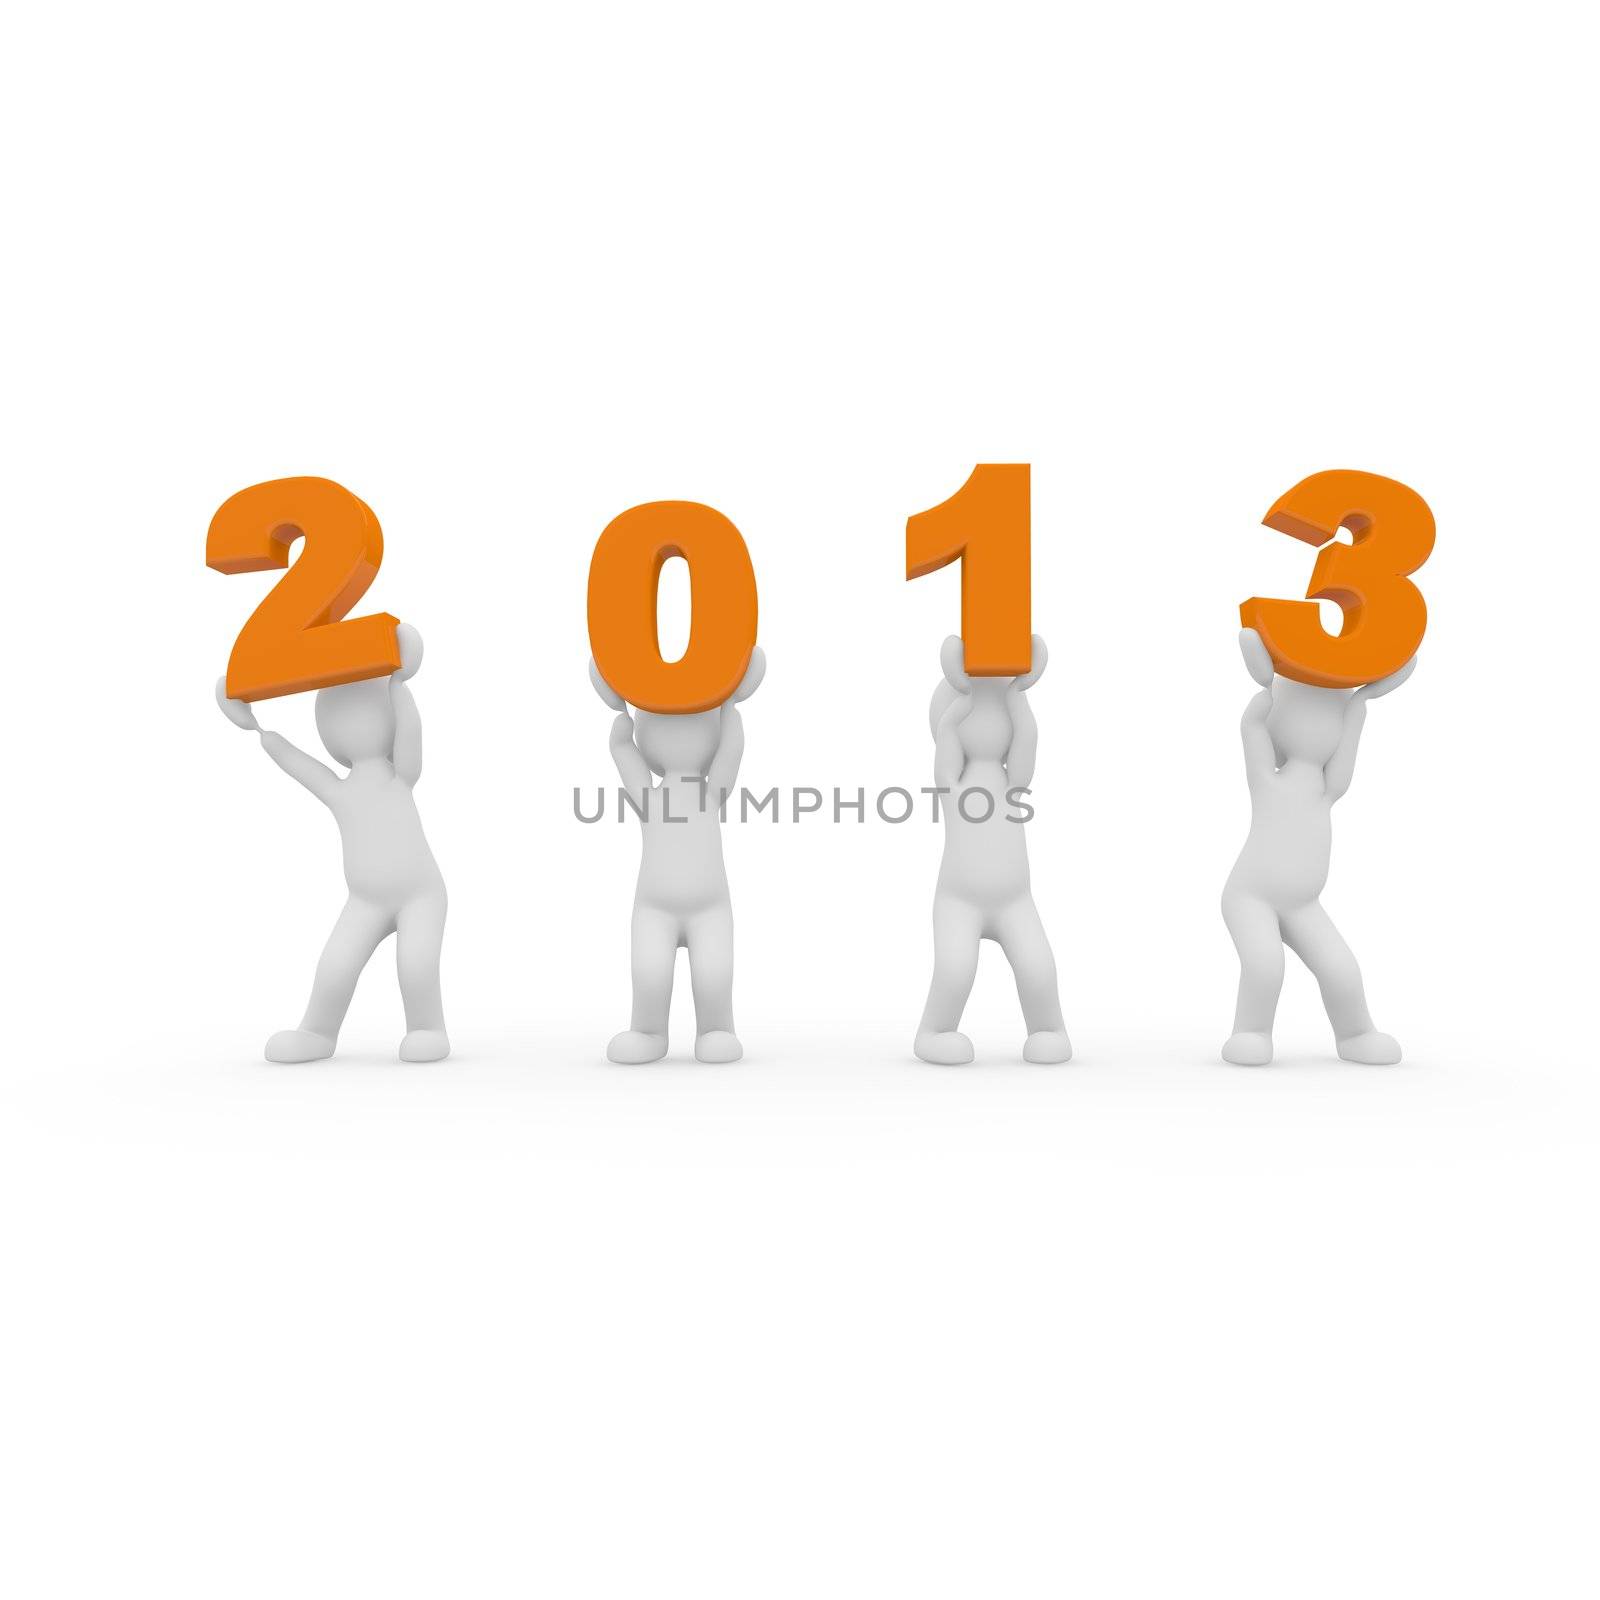 Let the year 2013 celebrate. Here is the rule: all have fun